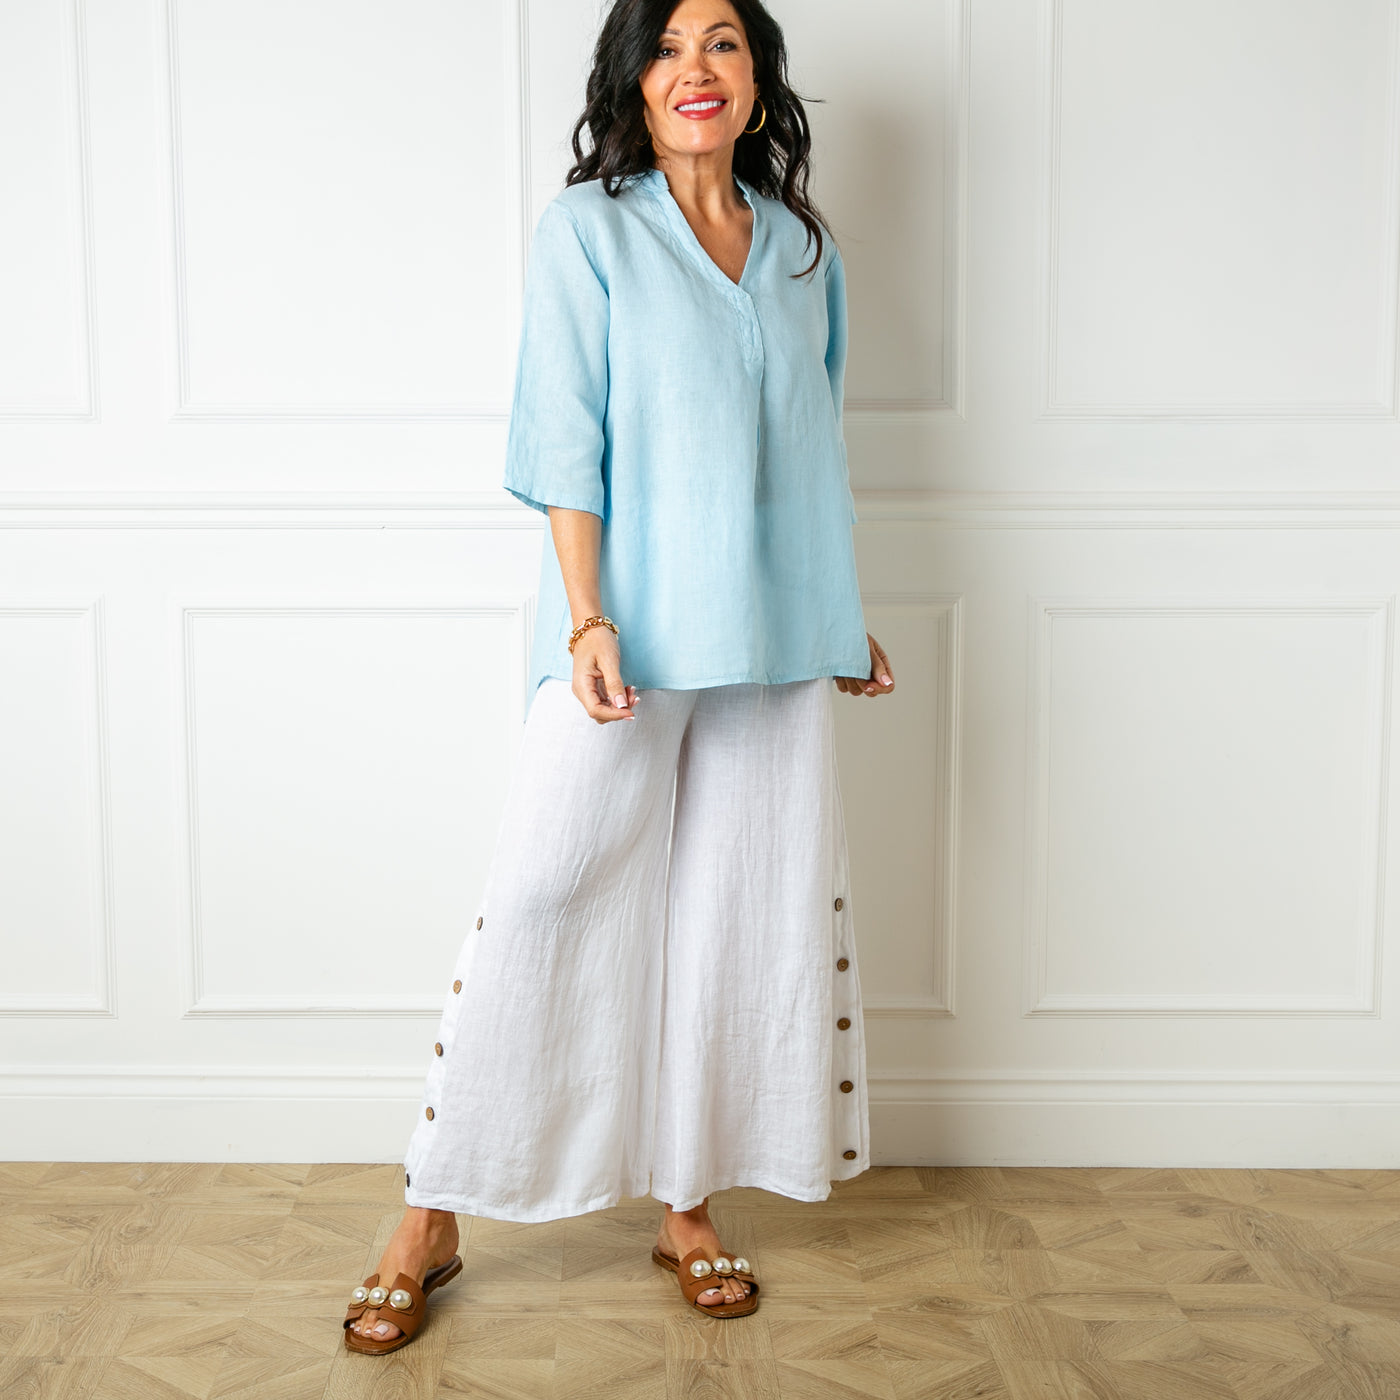 The Linen Tunic Top in baby blue which is perfect for a relaxed summer look 